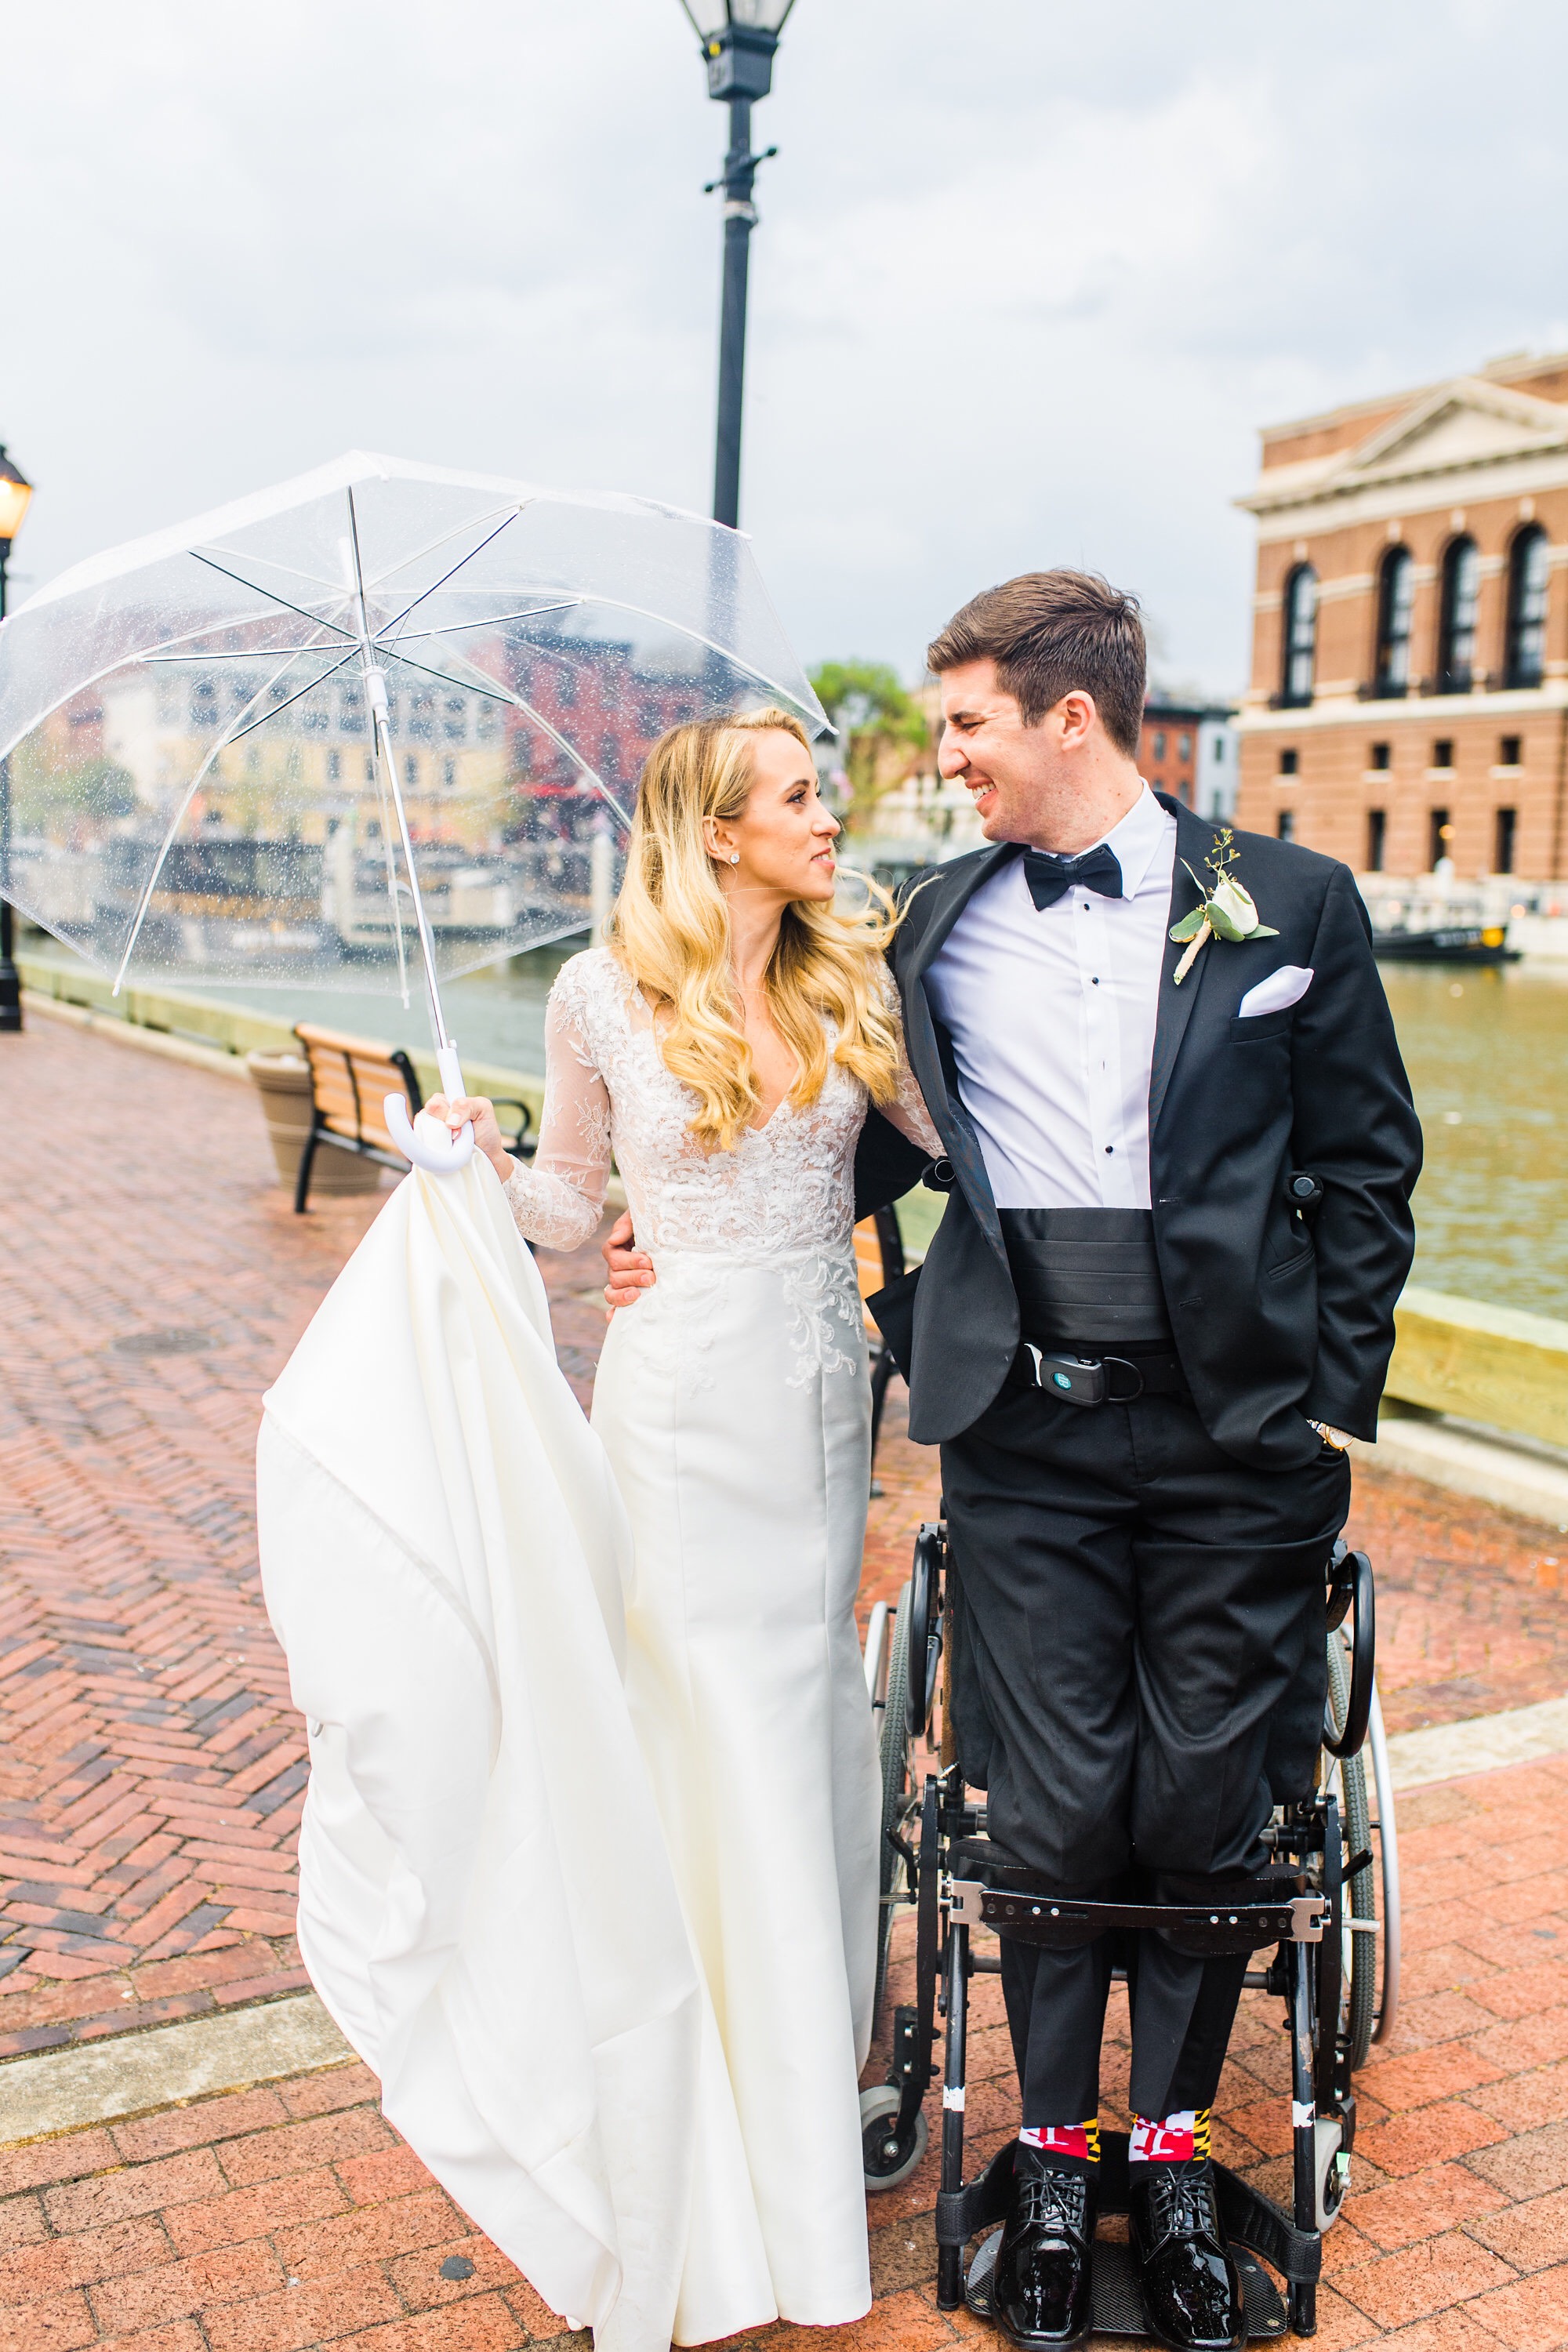 a bride and groom standing on a brick walkway. The bride holds a clear wedding umbrella for rain and the groom is standing up in a wheelchair supported by leg braces